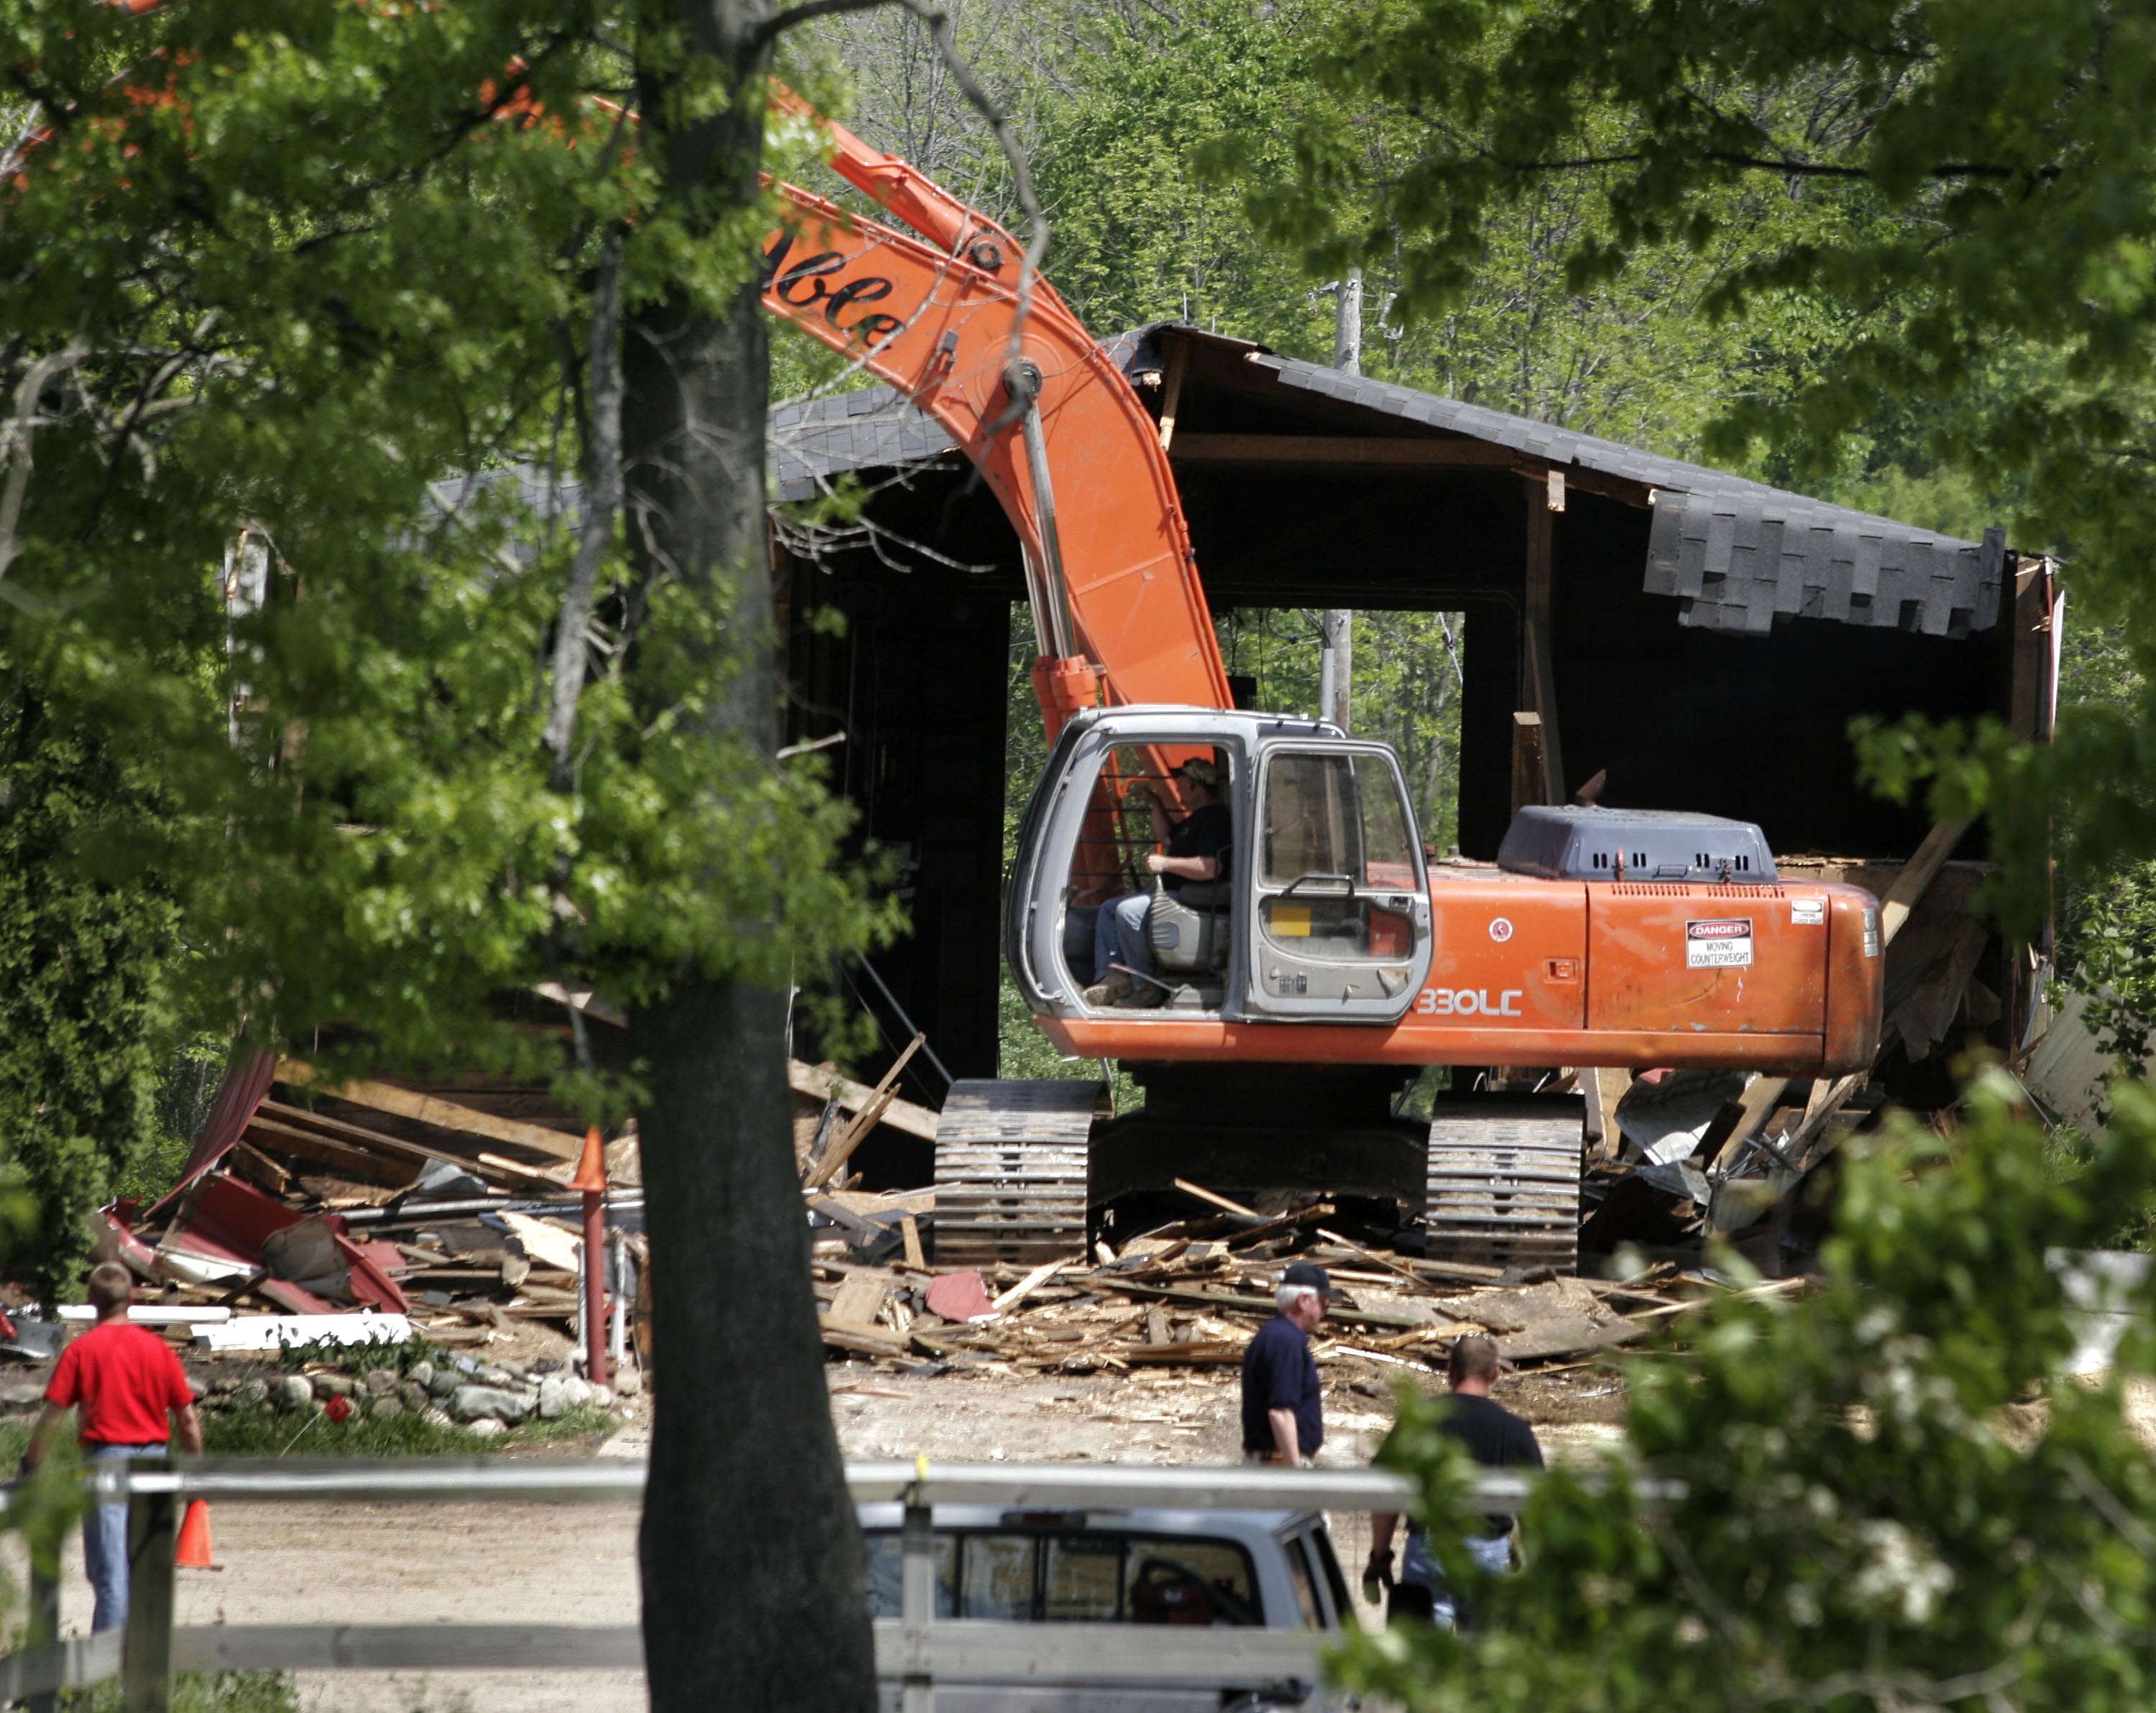 Demolition workers tear down a horse barn for the FBI during the search for Jimmy Hoffa's body at the Hidden Dreams Horse Farm May 24, 2006 in Milford, Michigan